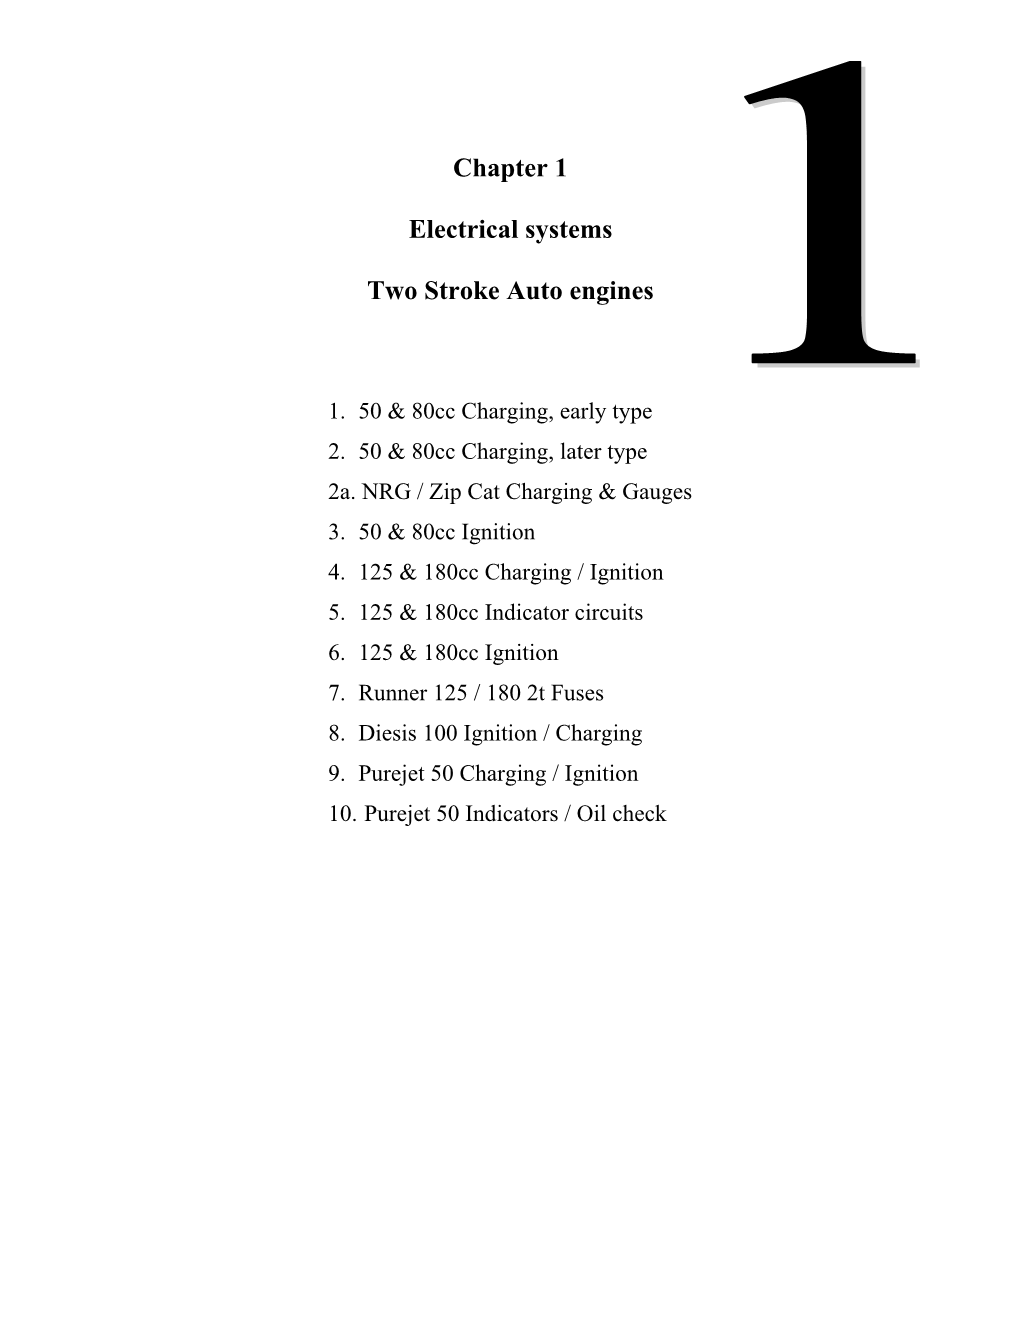 Chapter 1 Electrical Systems Two Stroke Auto Engines